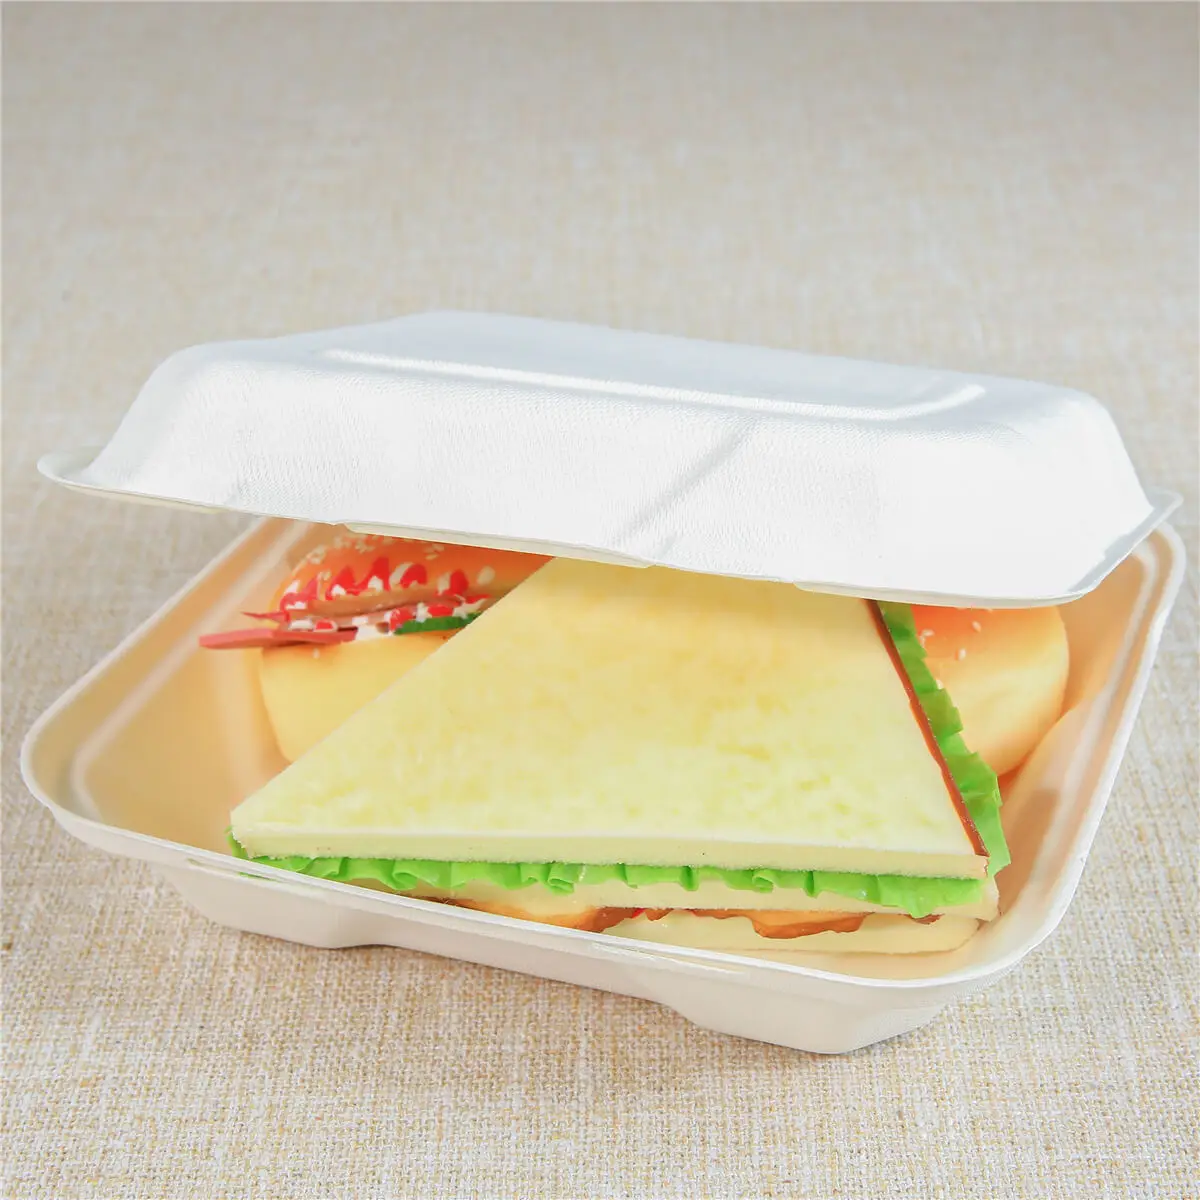 Compact Fast Food Containers : fast food containers